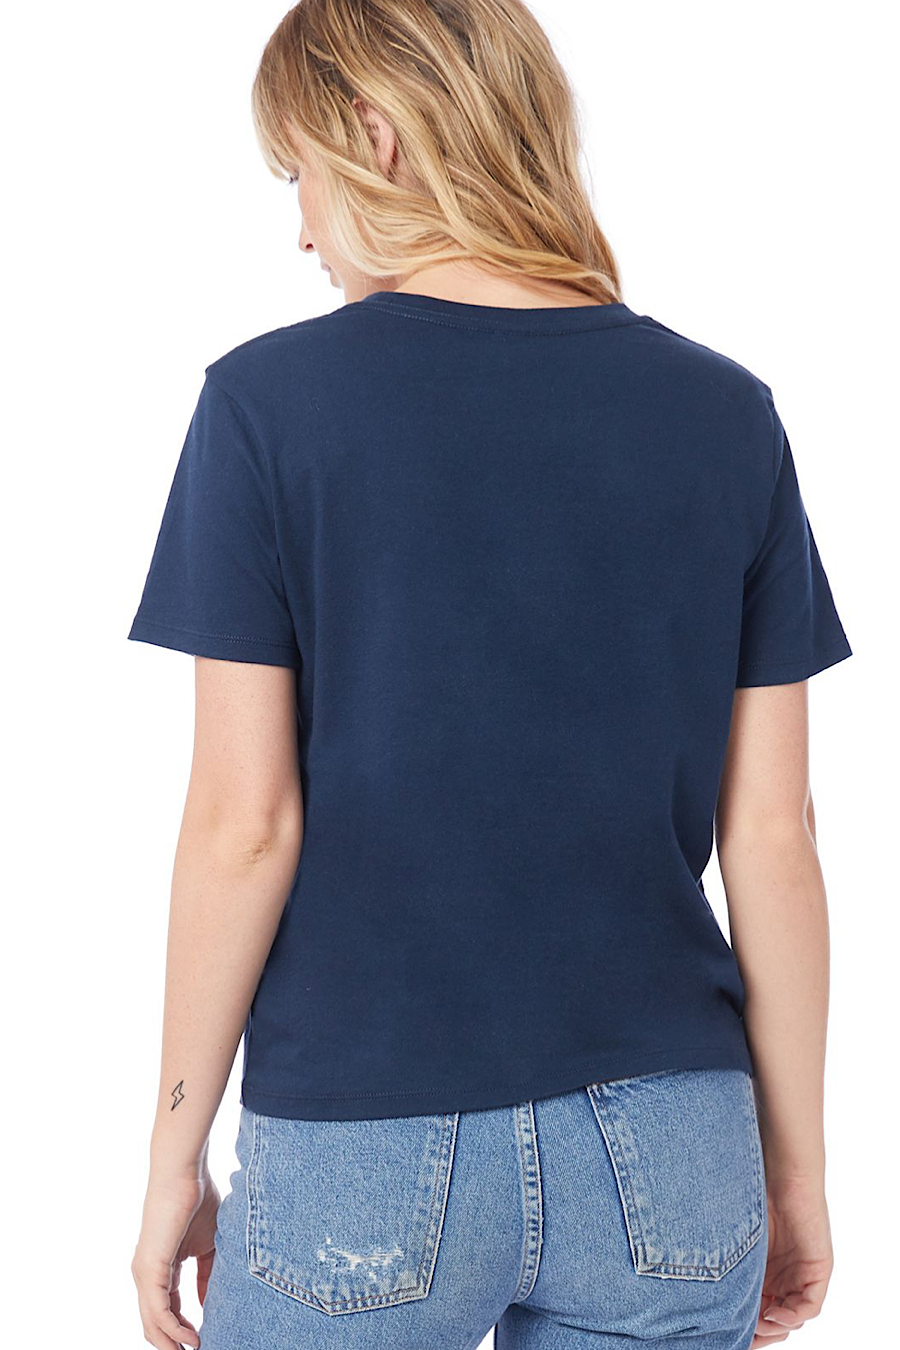 Her Go-To T-Shirt in Navy